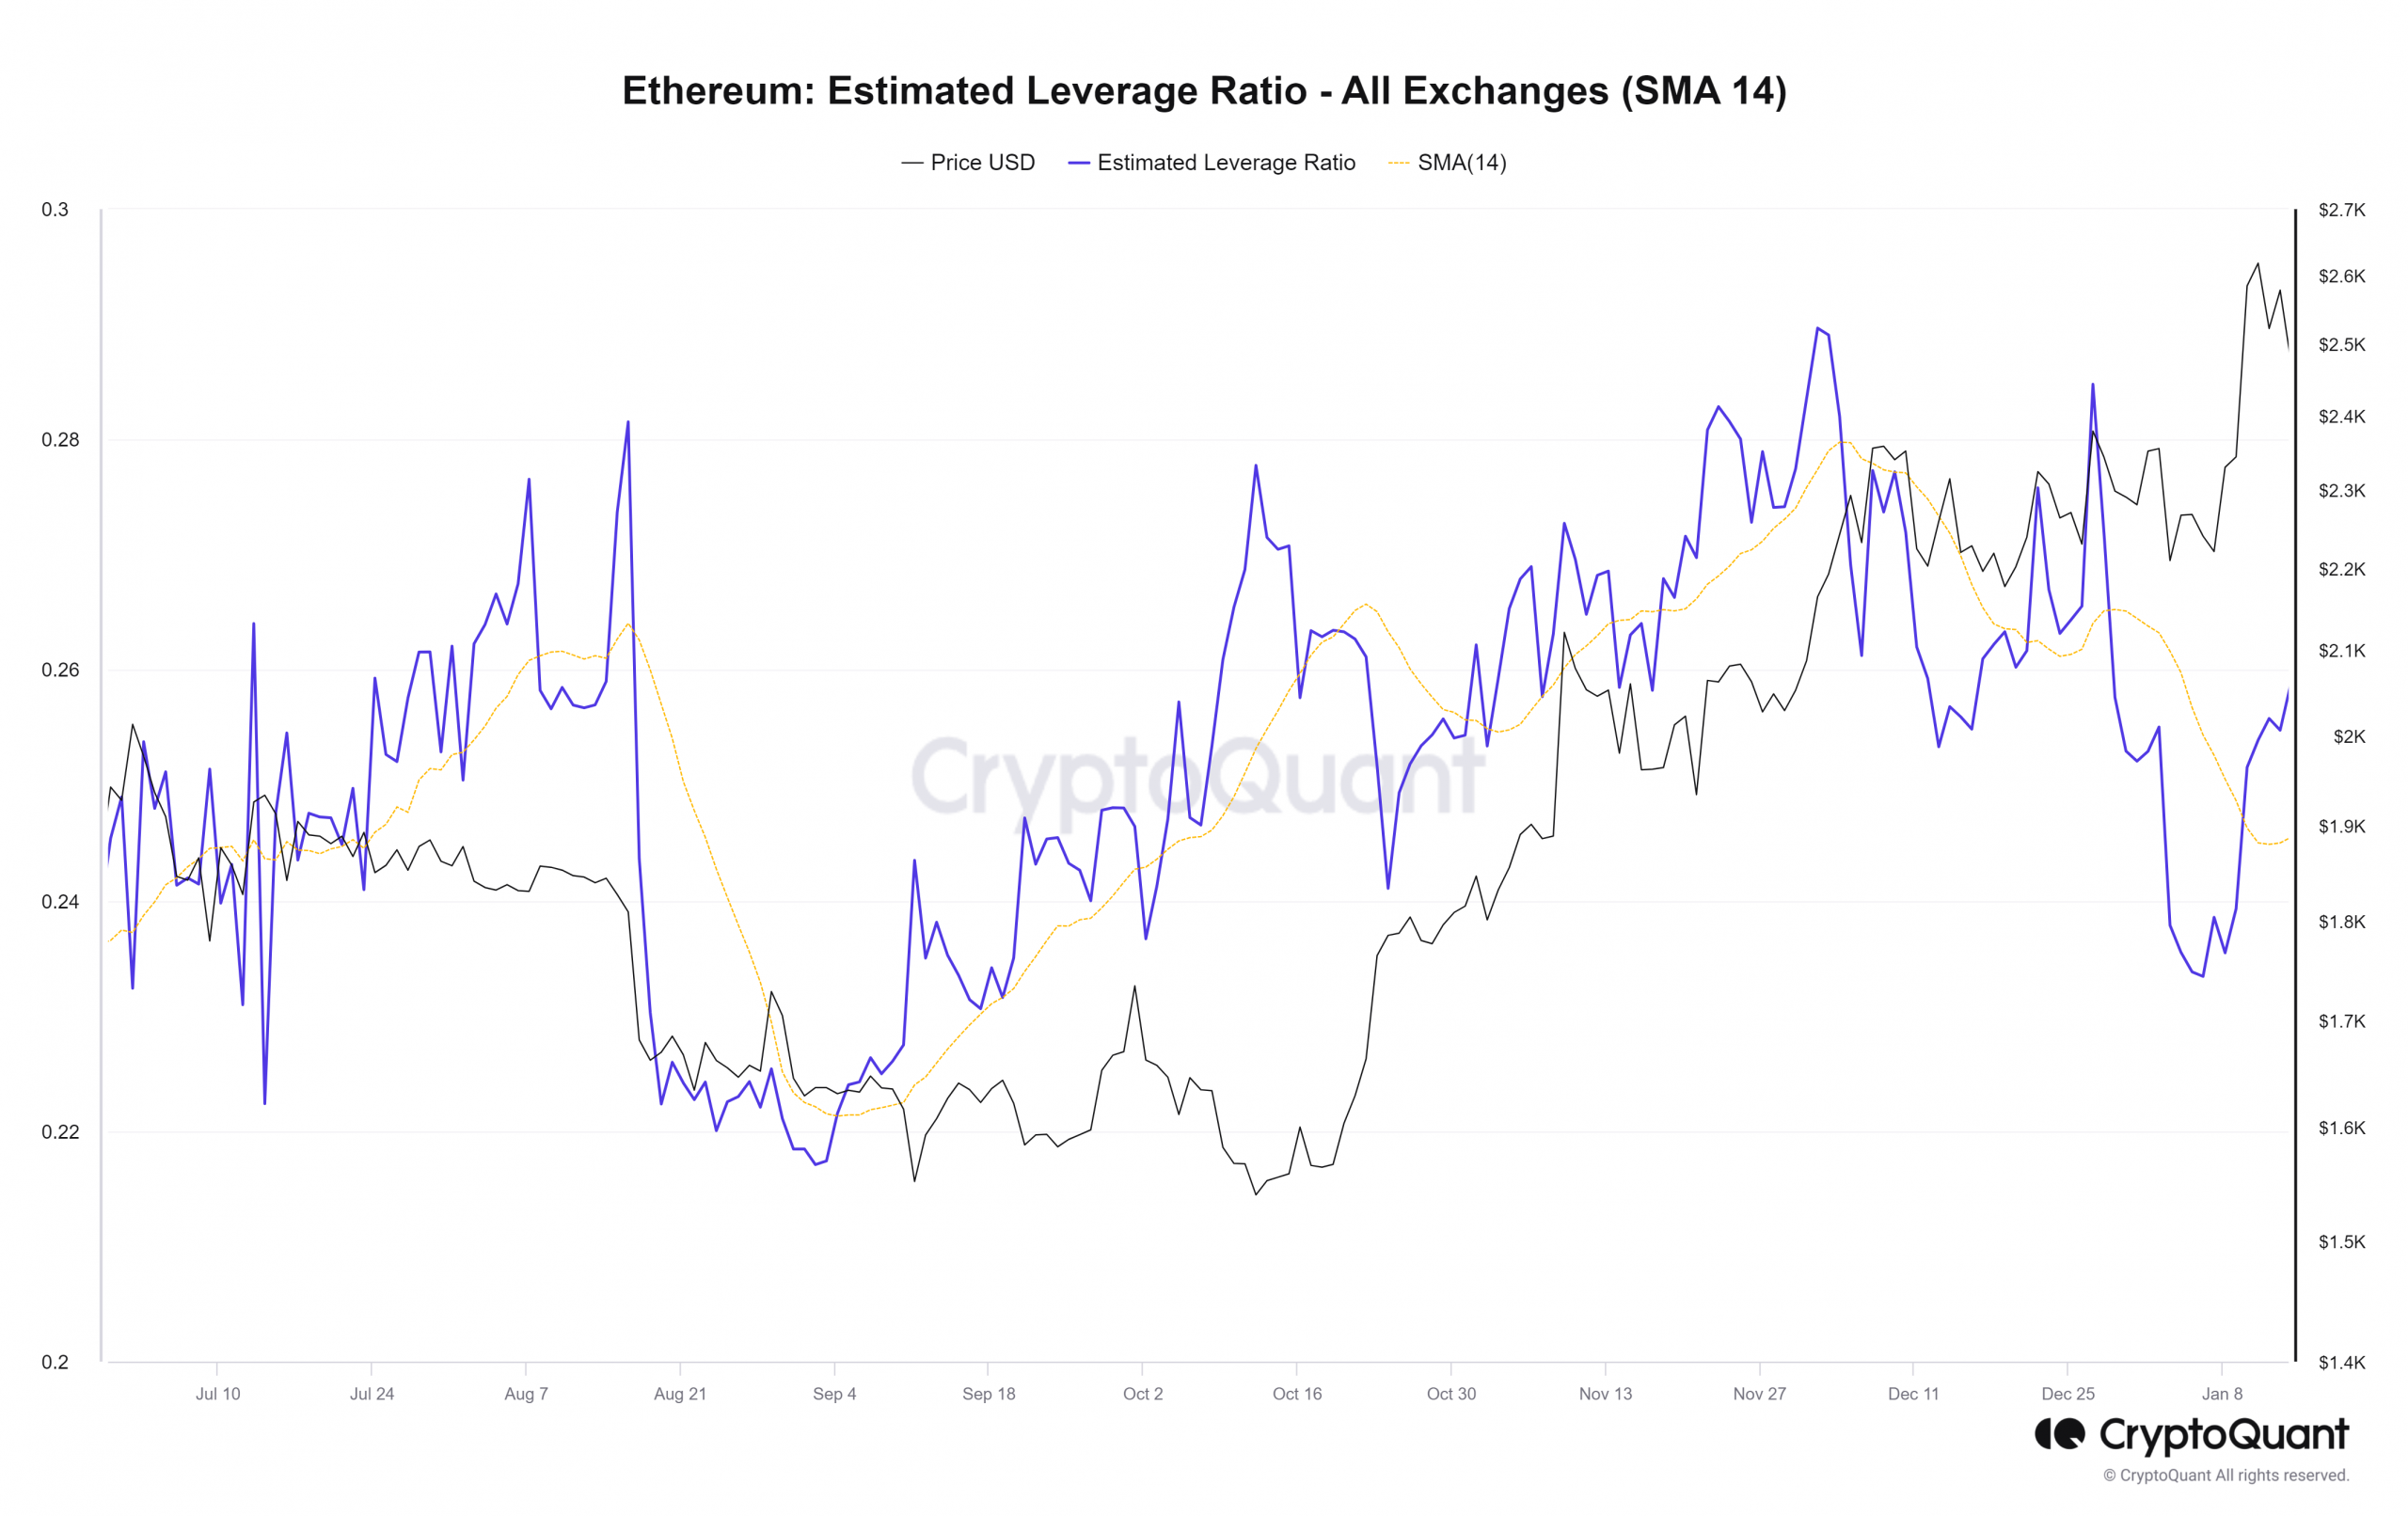 Ethereum witnesses lowered leverage ratio over the past month, here's what that means